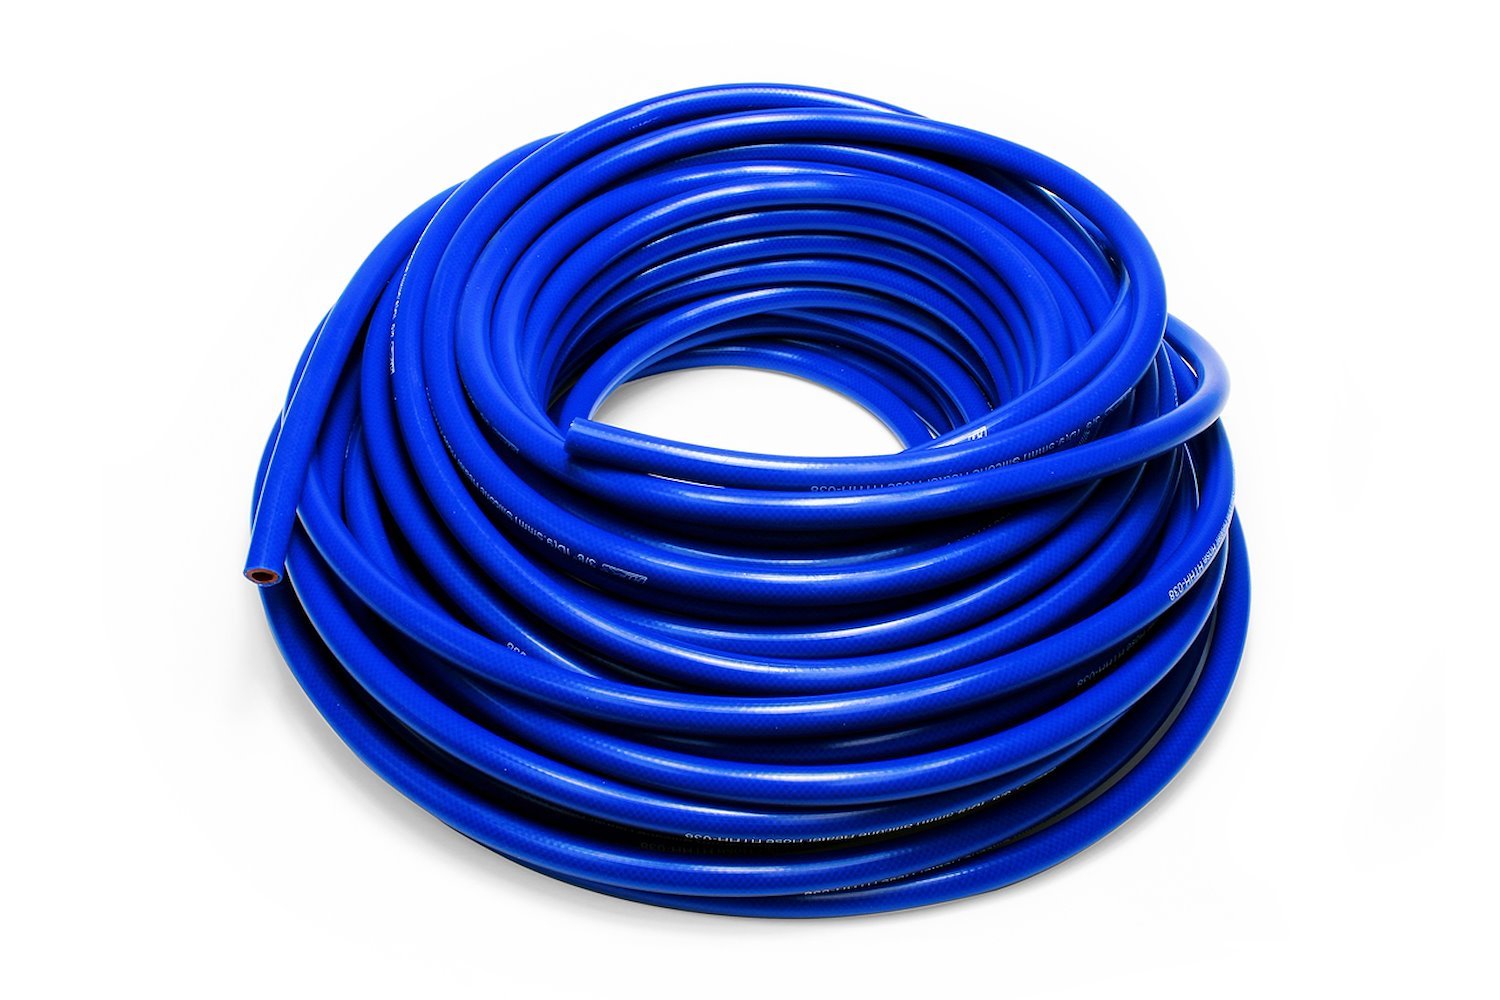 HTHH-100-BLUEx50 Silicone Heater Hose Tubing, High-Temp 1-Ply Reinforced, 1 in. ID, 50 ft. Roll, Blue